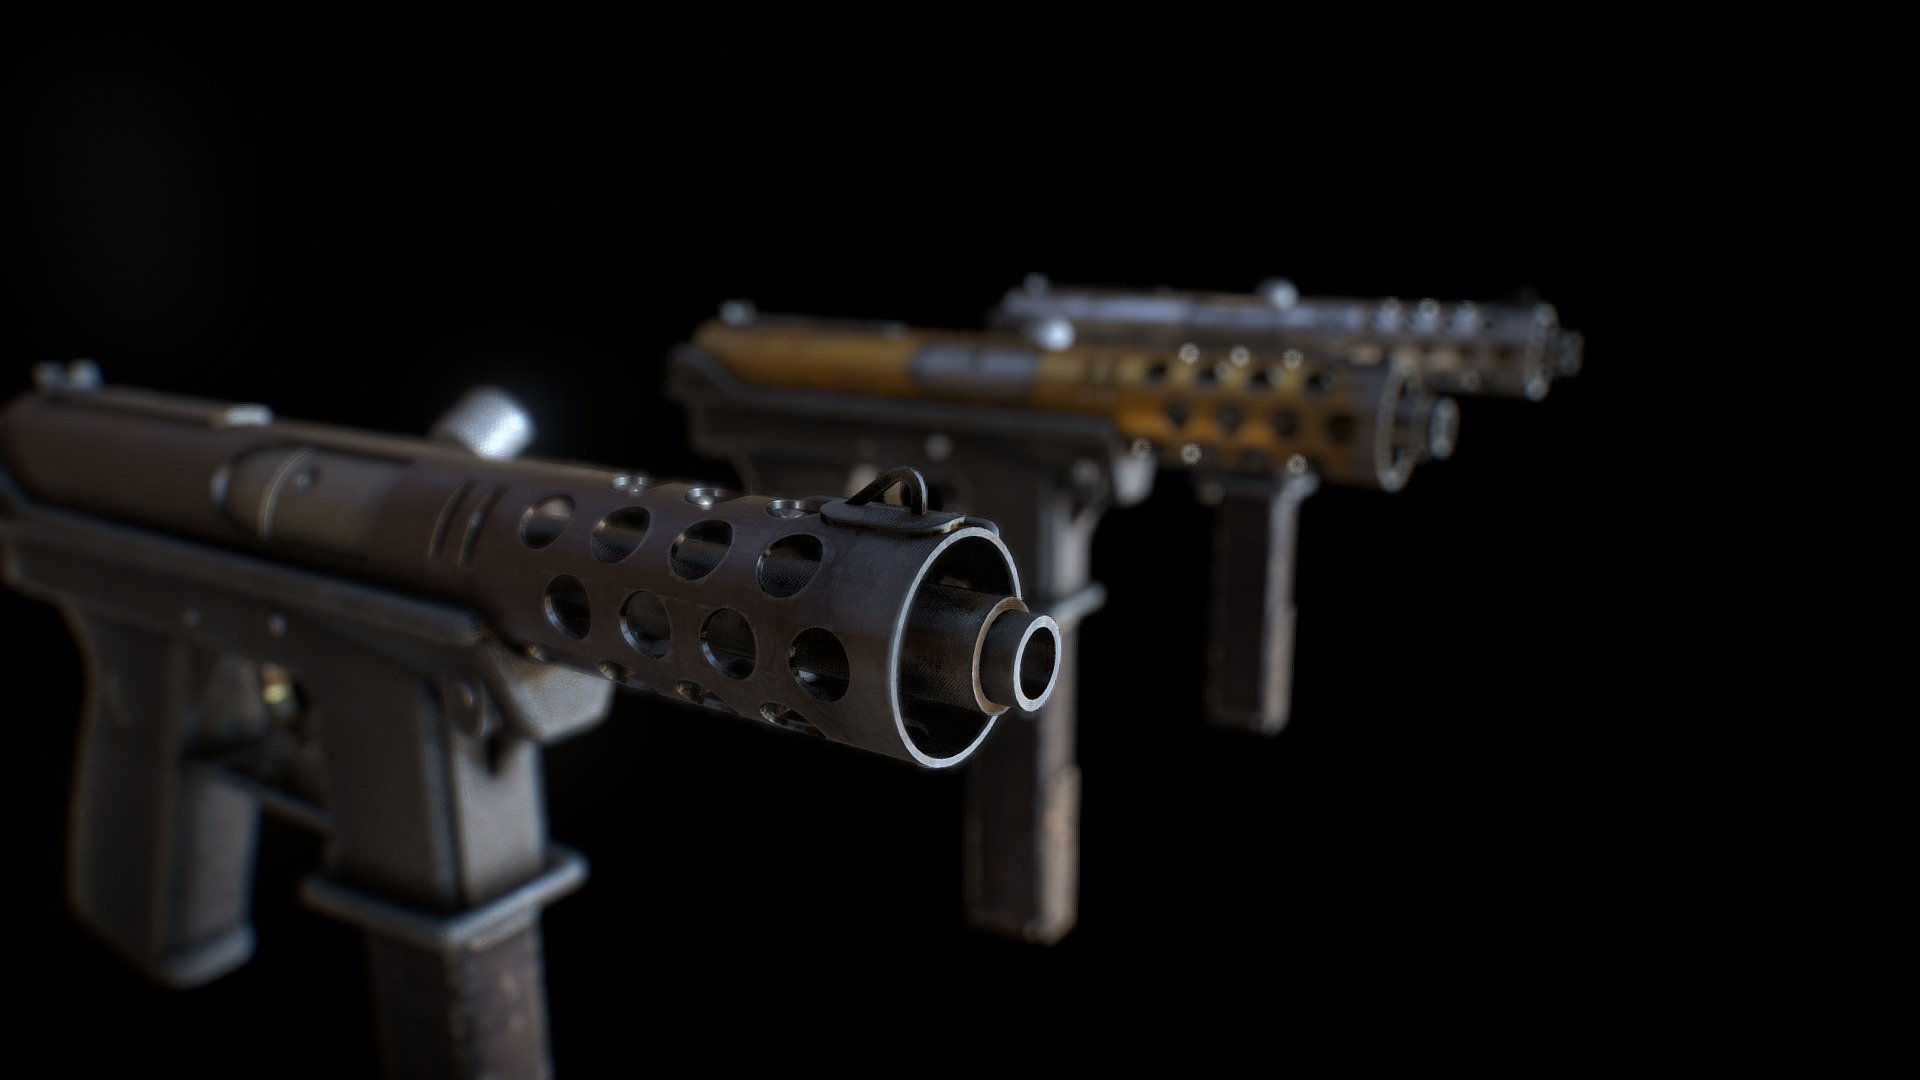 Stylized Low Poly TEC 9

Model contains 3 stylized PBR materials, each of which is a single 4k texture set.

Can be used in games as well as render pictures.

Any format, models, including the original blend file are available on request.

On ArtStation: https://www.artstation.com/artwork/5BbvqP - Stylized Low Poly TEC 9 - Buy Royalty Free 3D model by Andante (@AndanteOle) 3d model